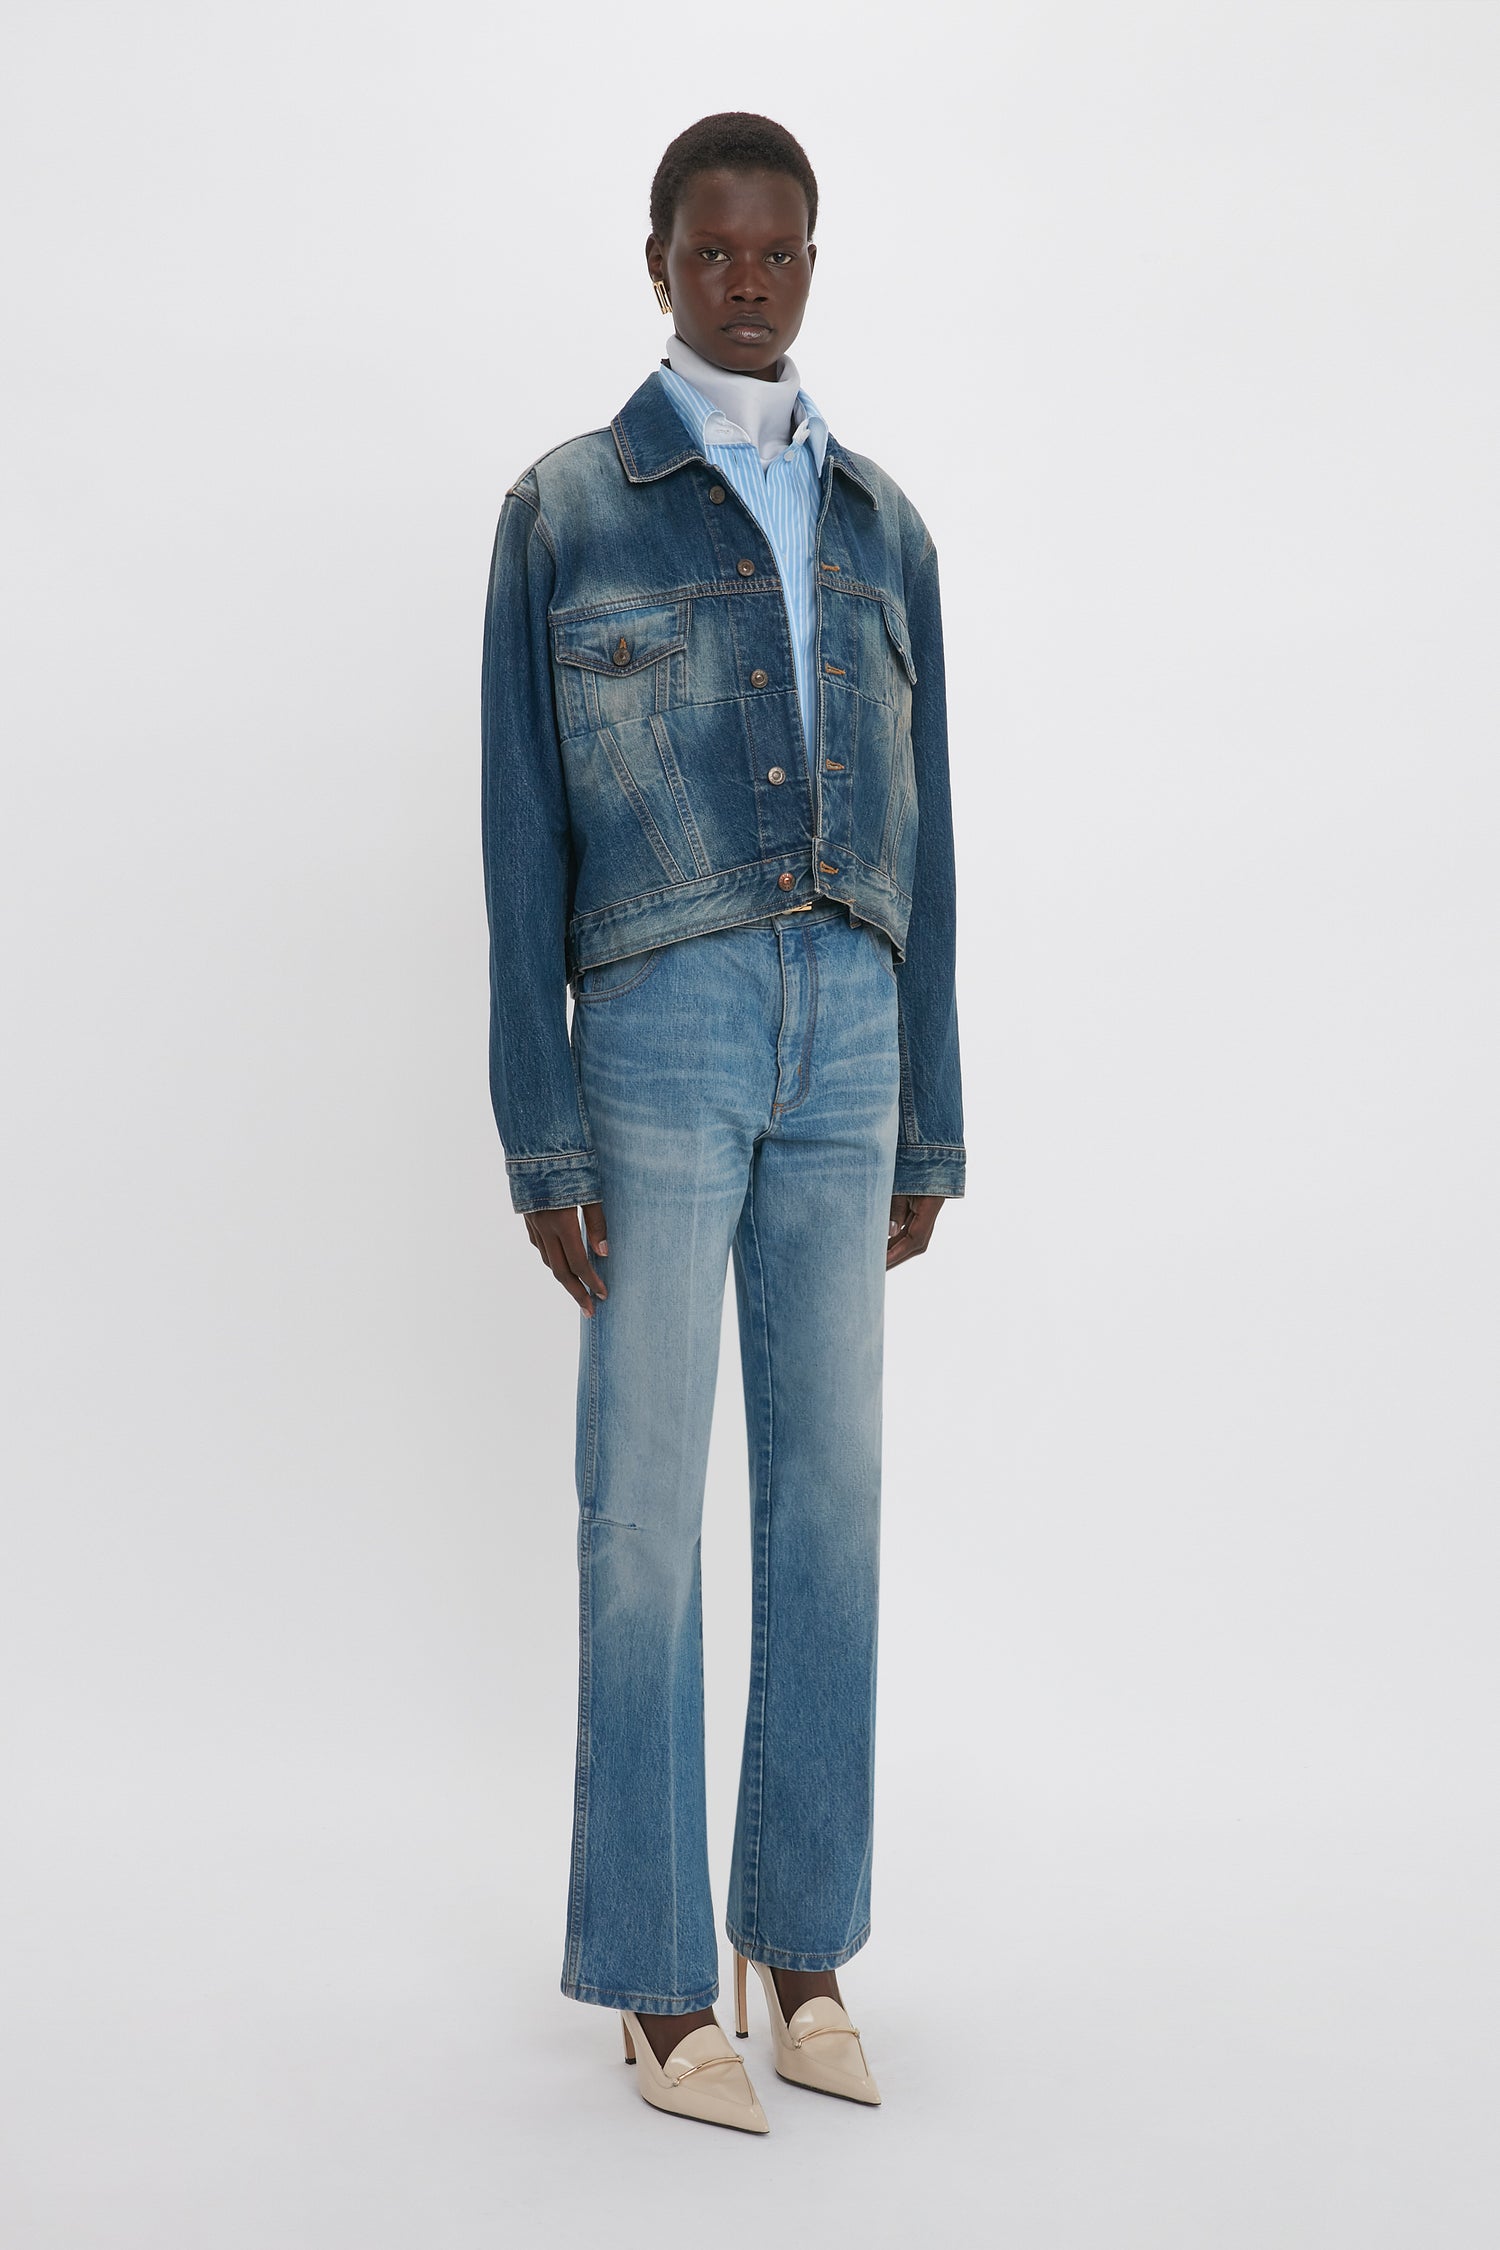 A person wearing a luxury denim jacket and jeans stands against a white background, looking at the camera. They are also wearing a blue shirt underneath the Cropped Denim Jacket In Heavy Vintage Indigo Wash by Victoria Beckham and beige pointed-toe shoes, exuding an effortless Victoria Beckham-inspired style.